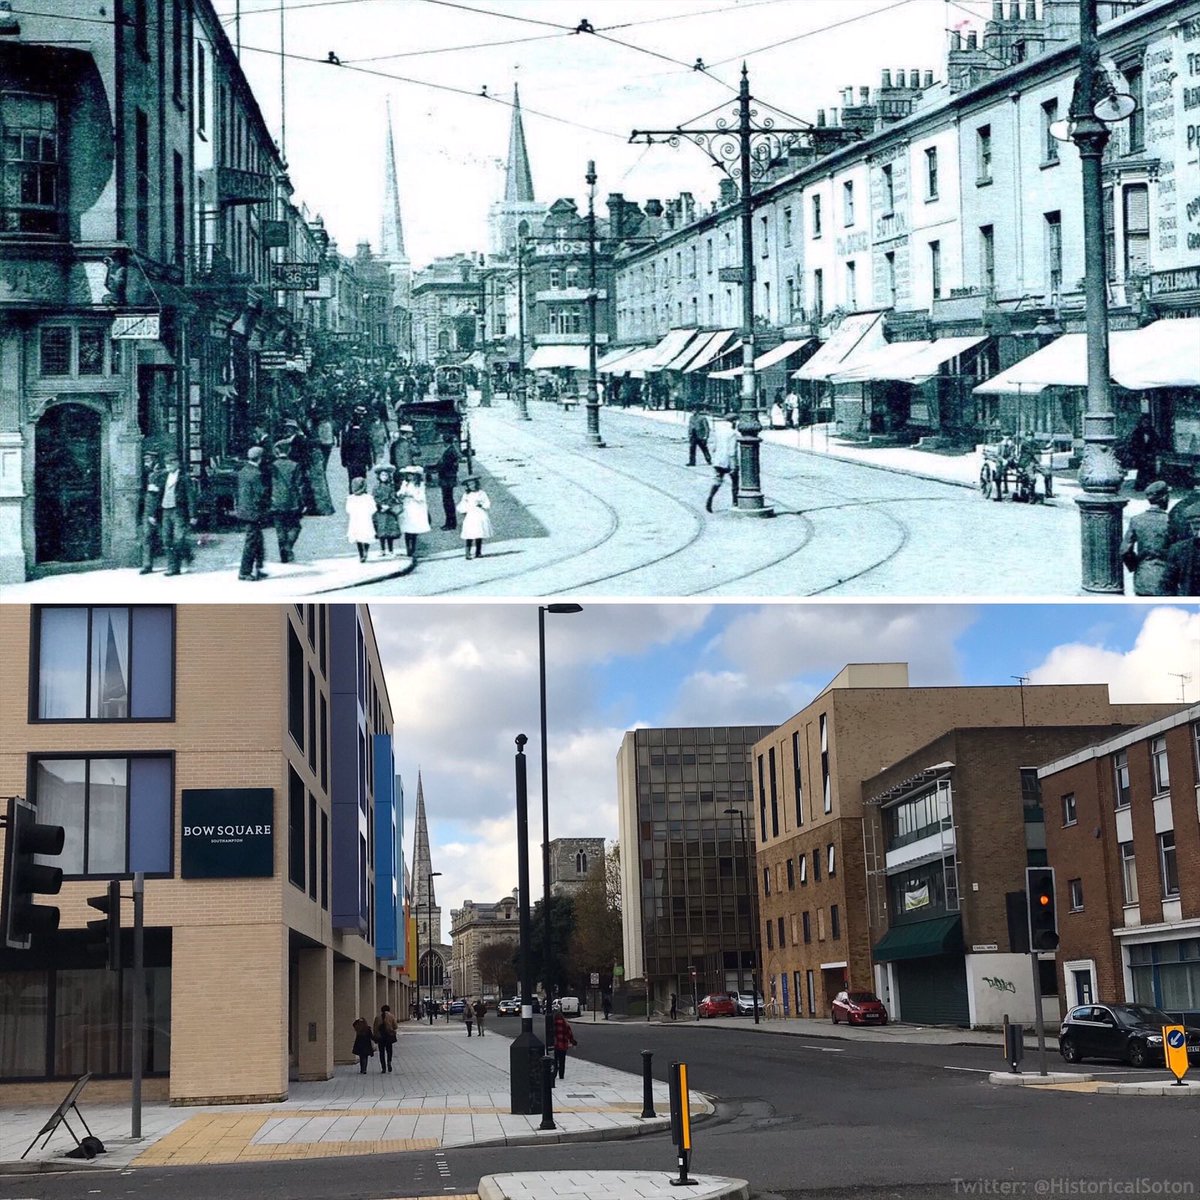 Bernard Street, then and now. The Blitz would change the face of Southampton forever...